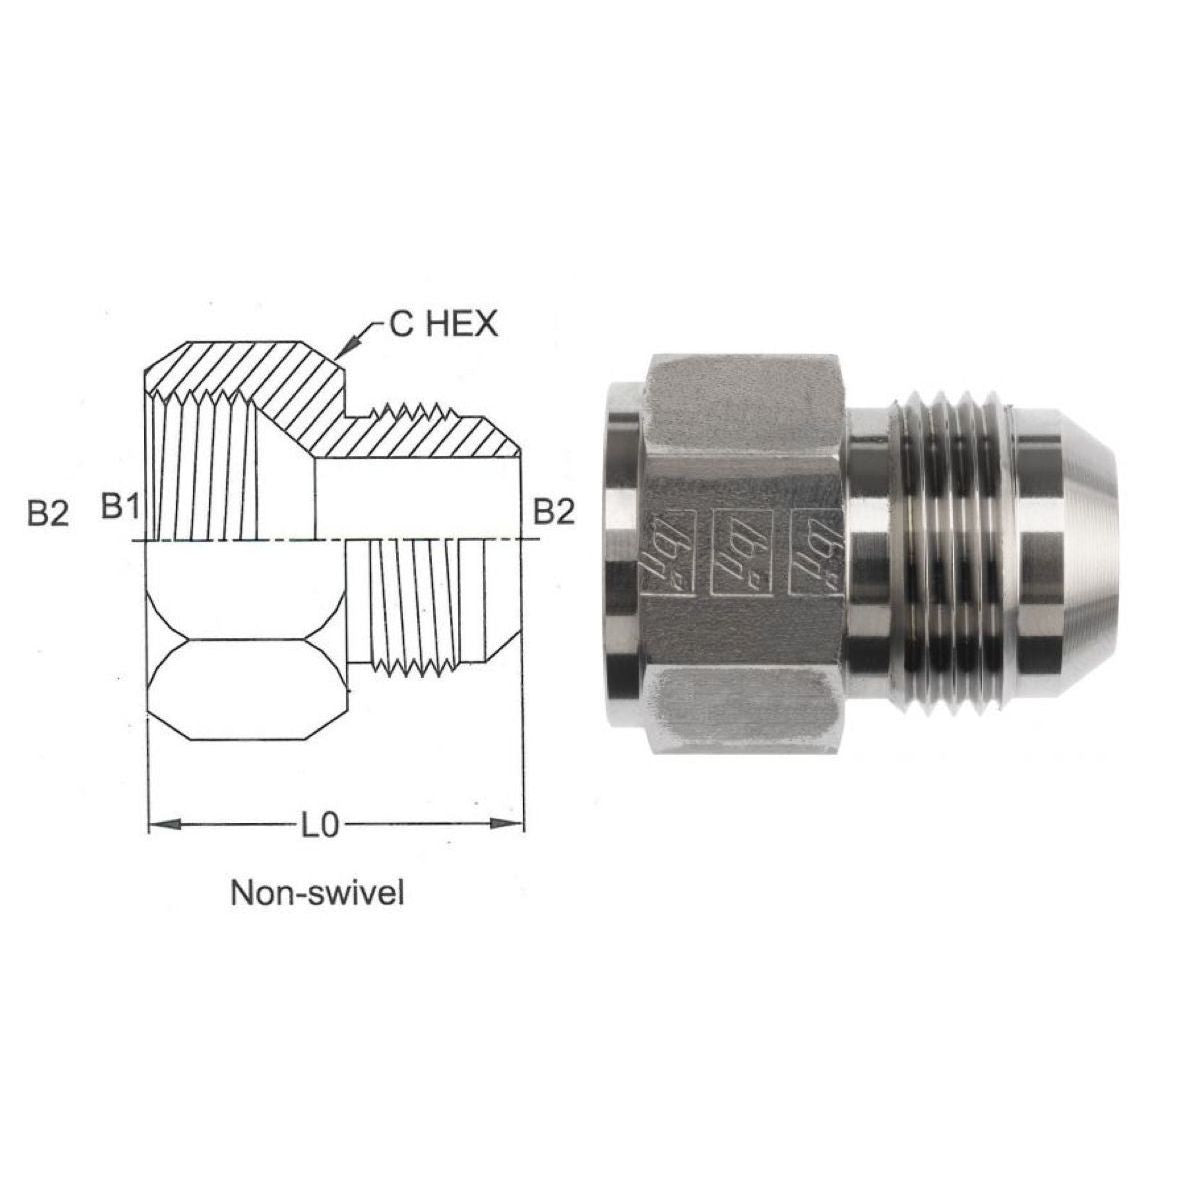 2406-06-04-SS : OneHydraulics  Straight Reducer, Non-Swivel, Straight, 0.375 (3/8") Female JIC x 0.25 (1/4") Male, Stainless Steel